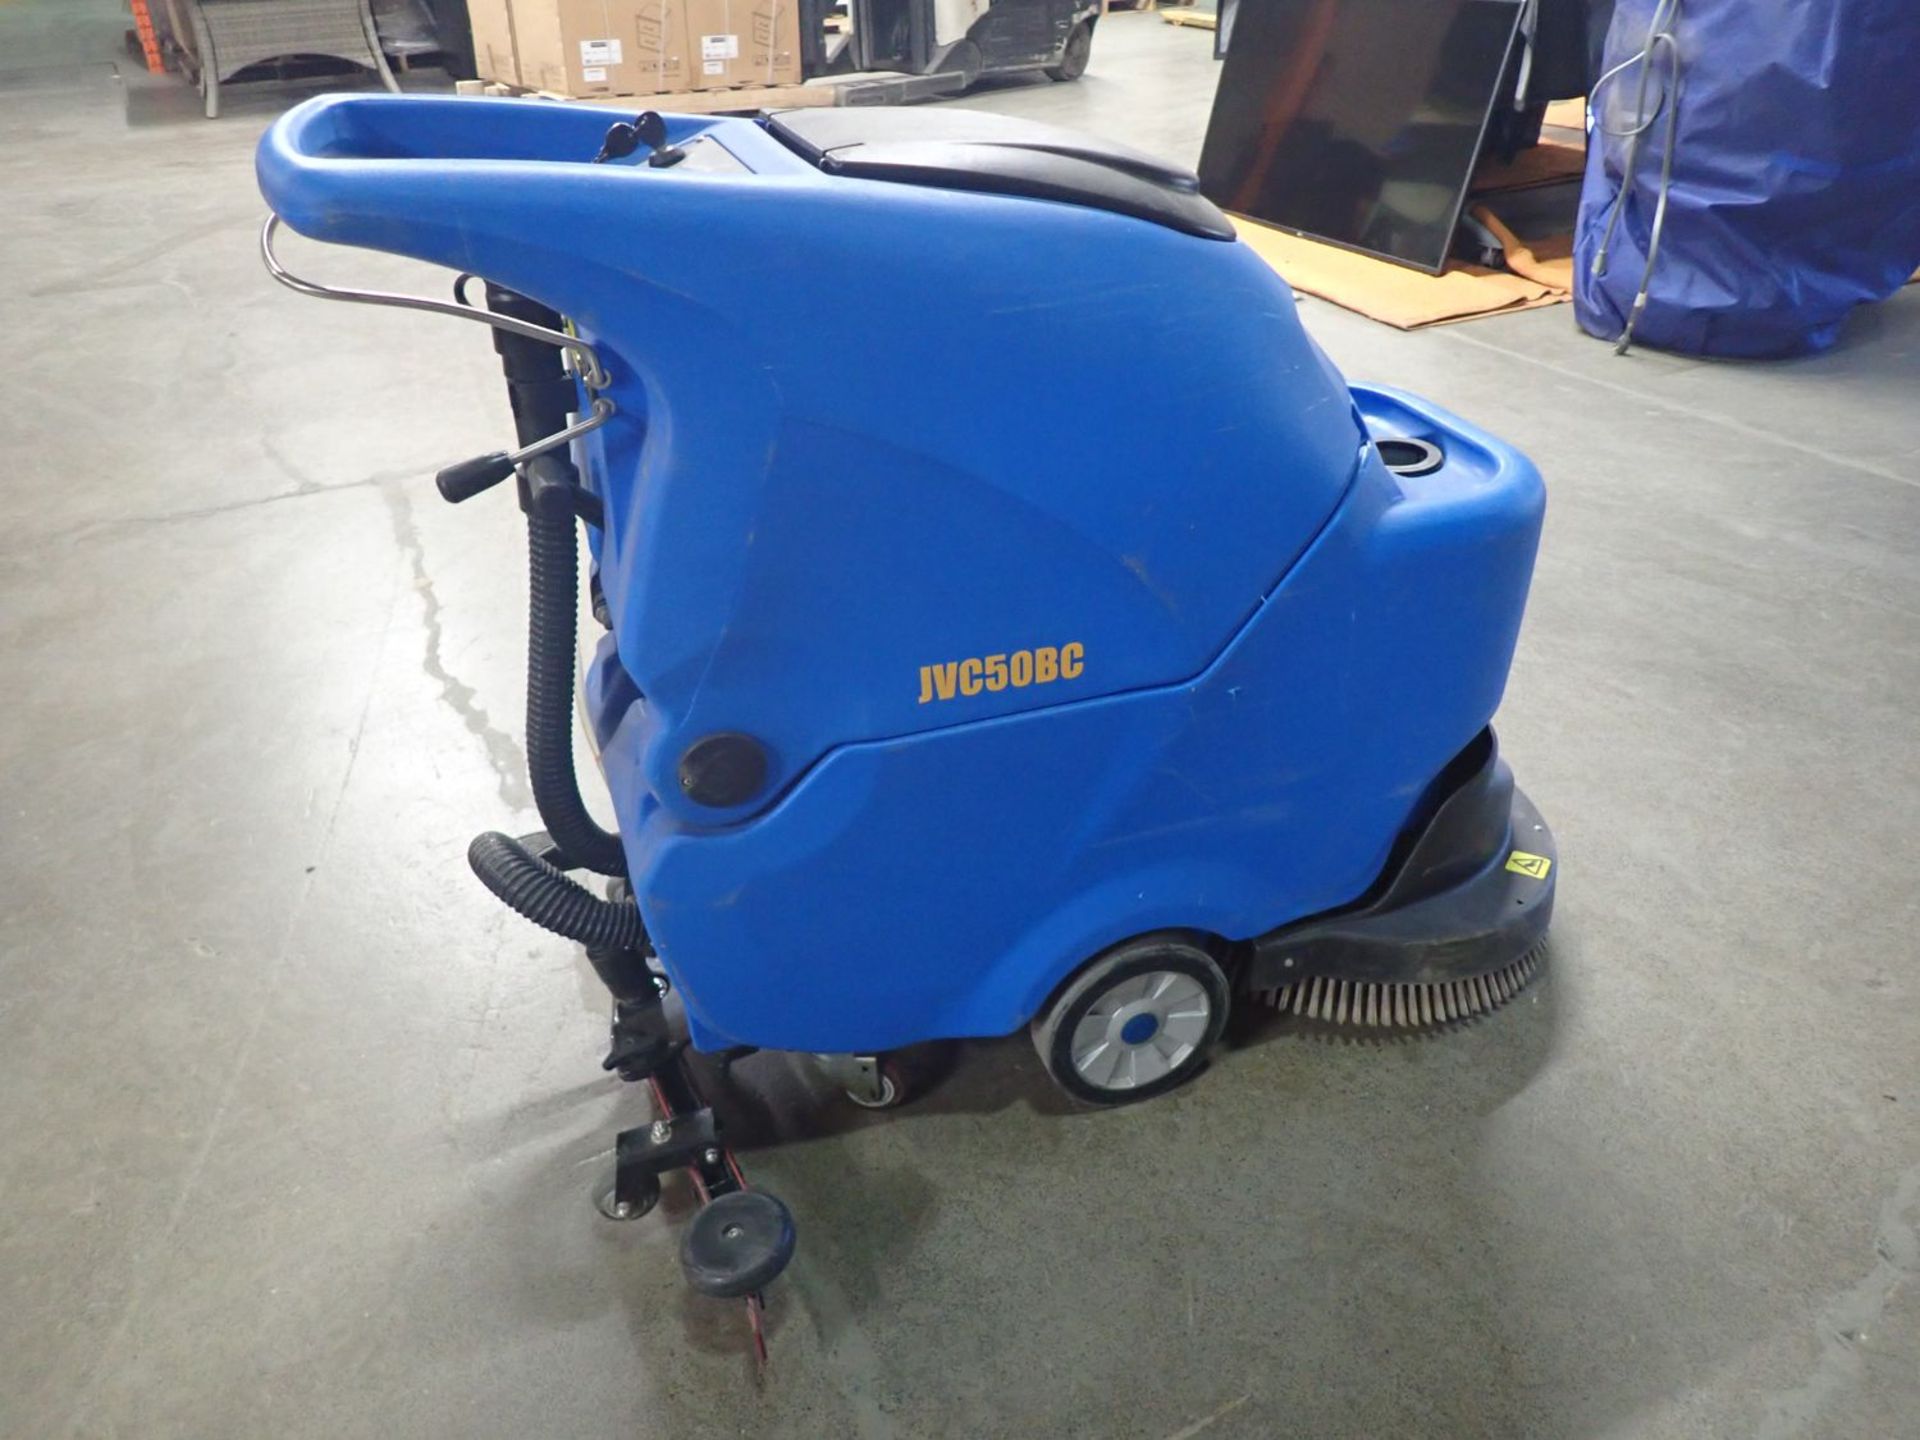 JOHNNY VAC JVC50BC 20" COMMERCIAL FLOOR CLEANER (NEEDS BATTERIES) - Image 2 of 5